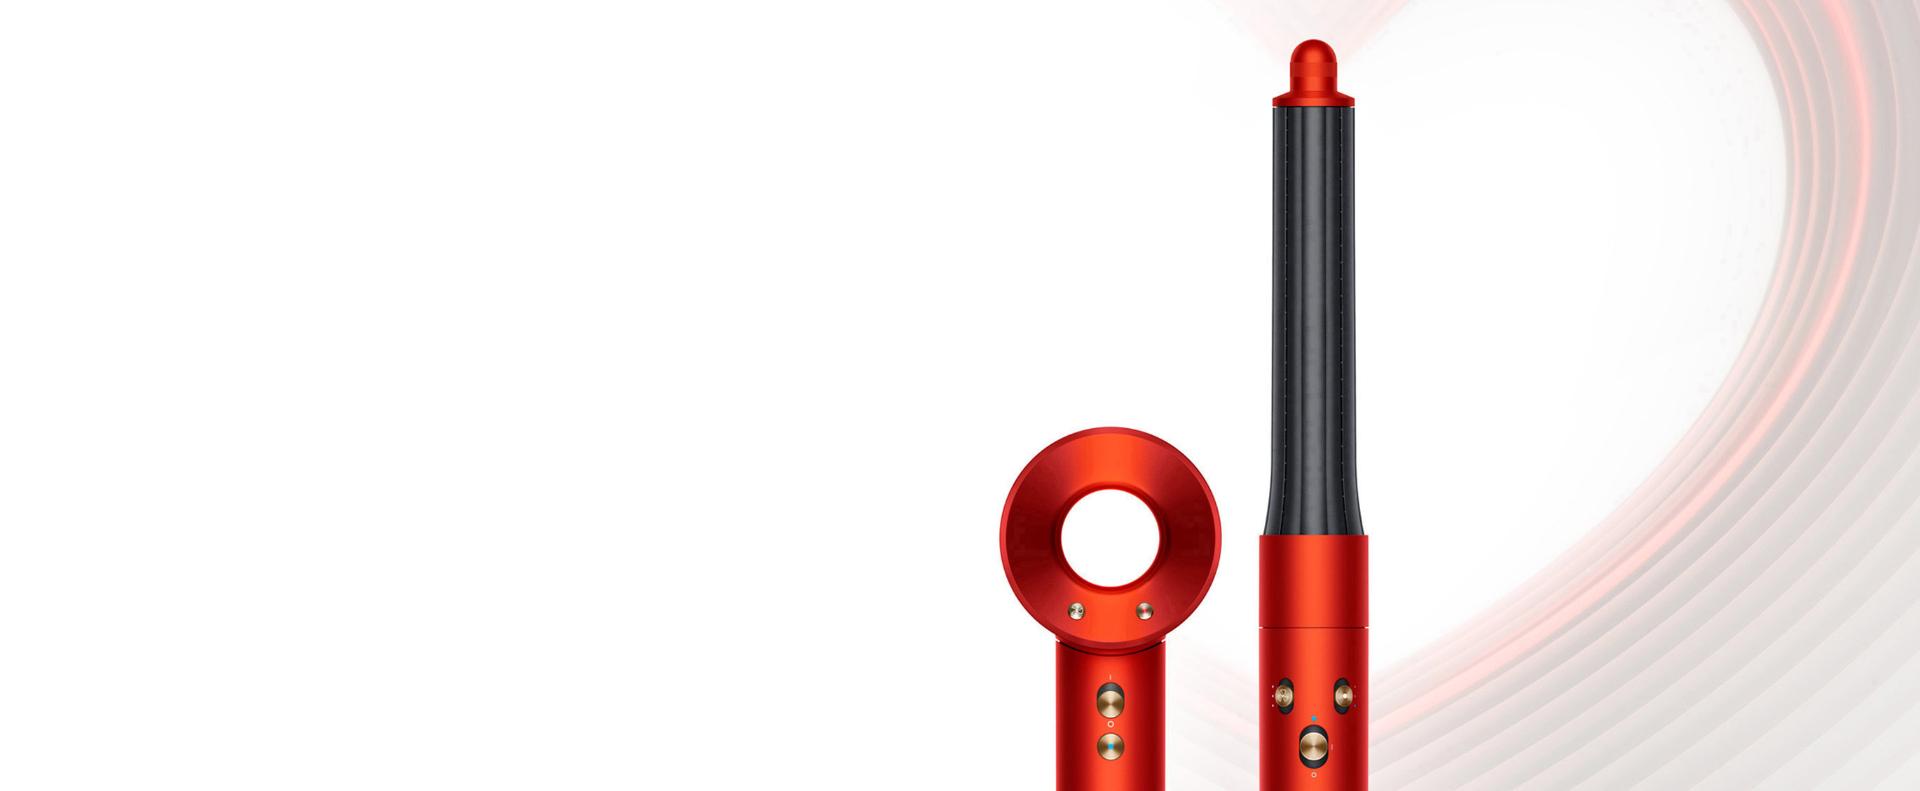 Dyson Supersonic and Dyson Airwrap Complete Long in Topaz orange, on a heart-design background.